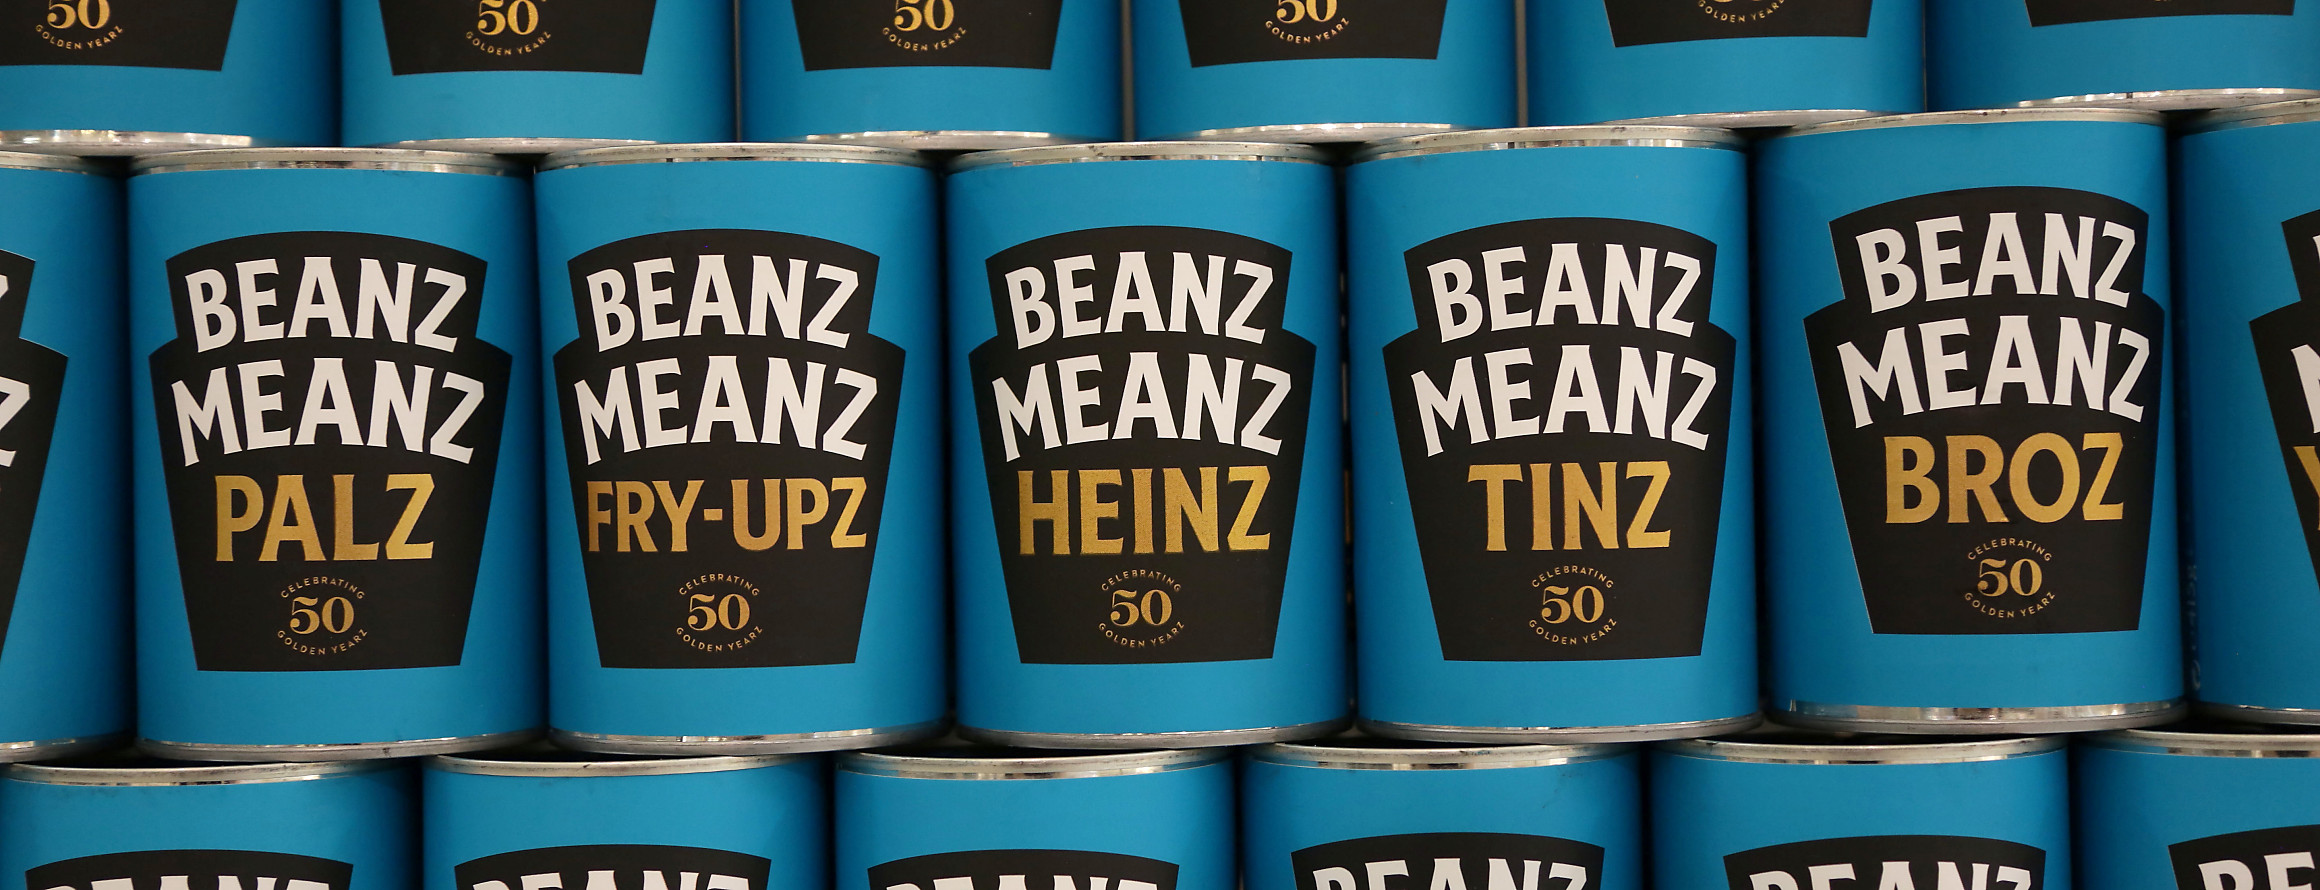 Beanz Meanz funding for The Ideaz Foundation